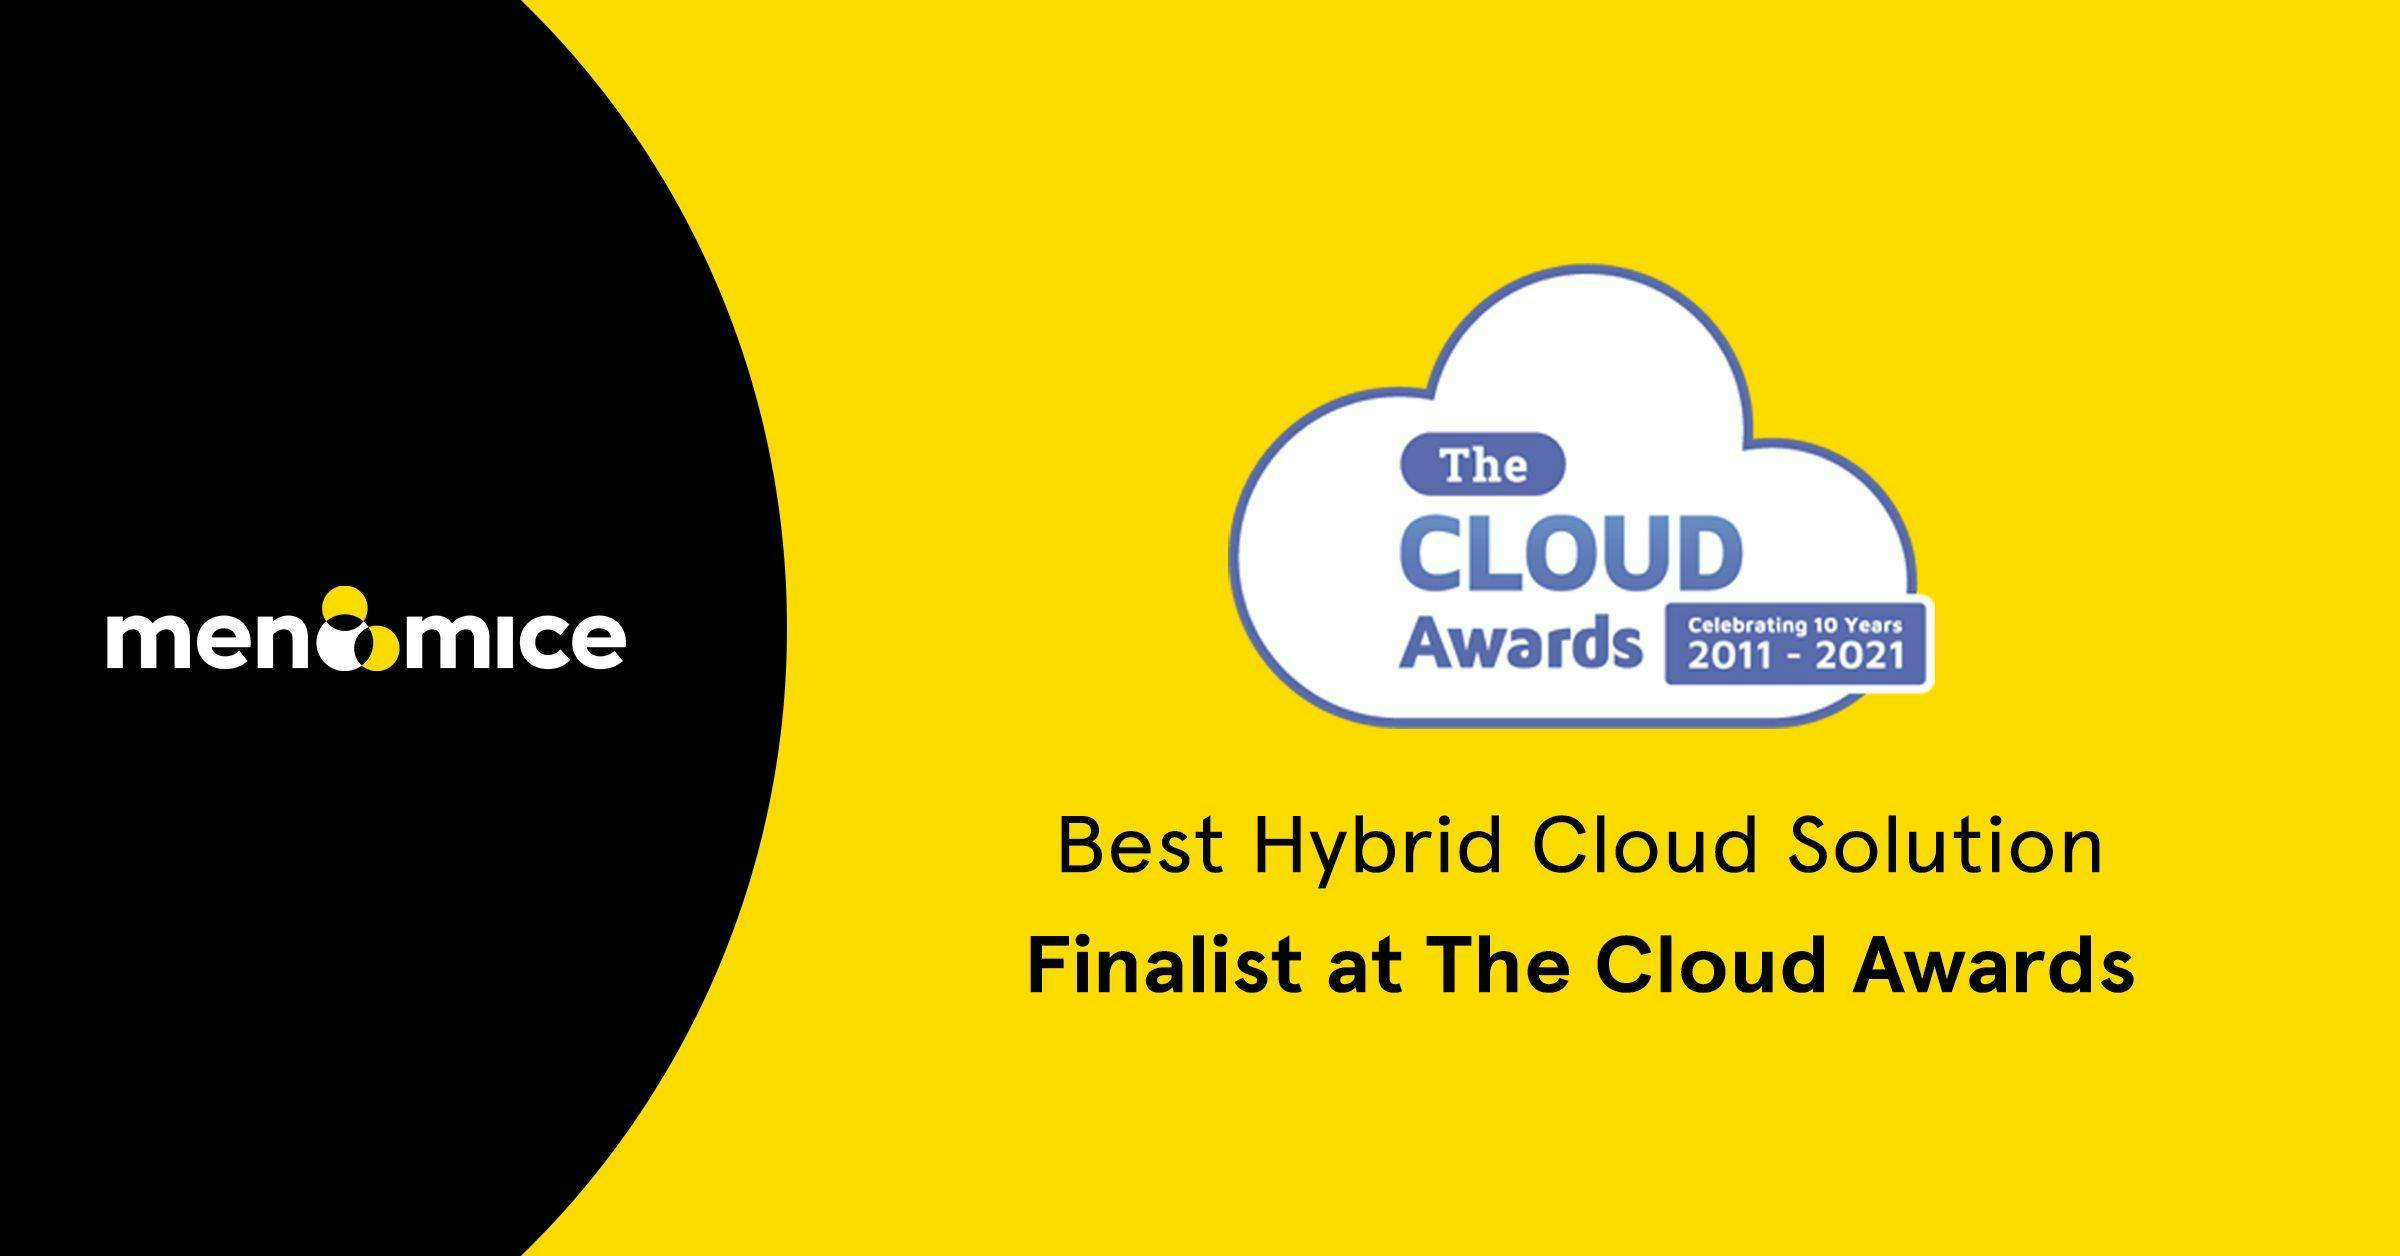 Finalist at The Cloud Awards